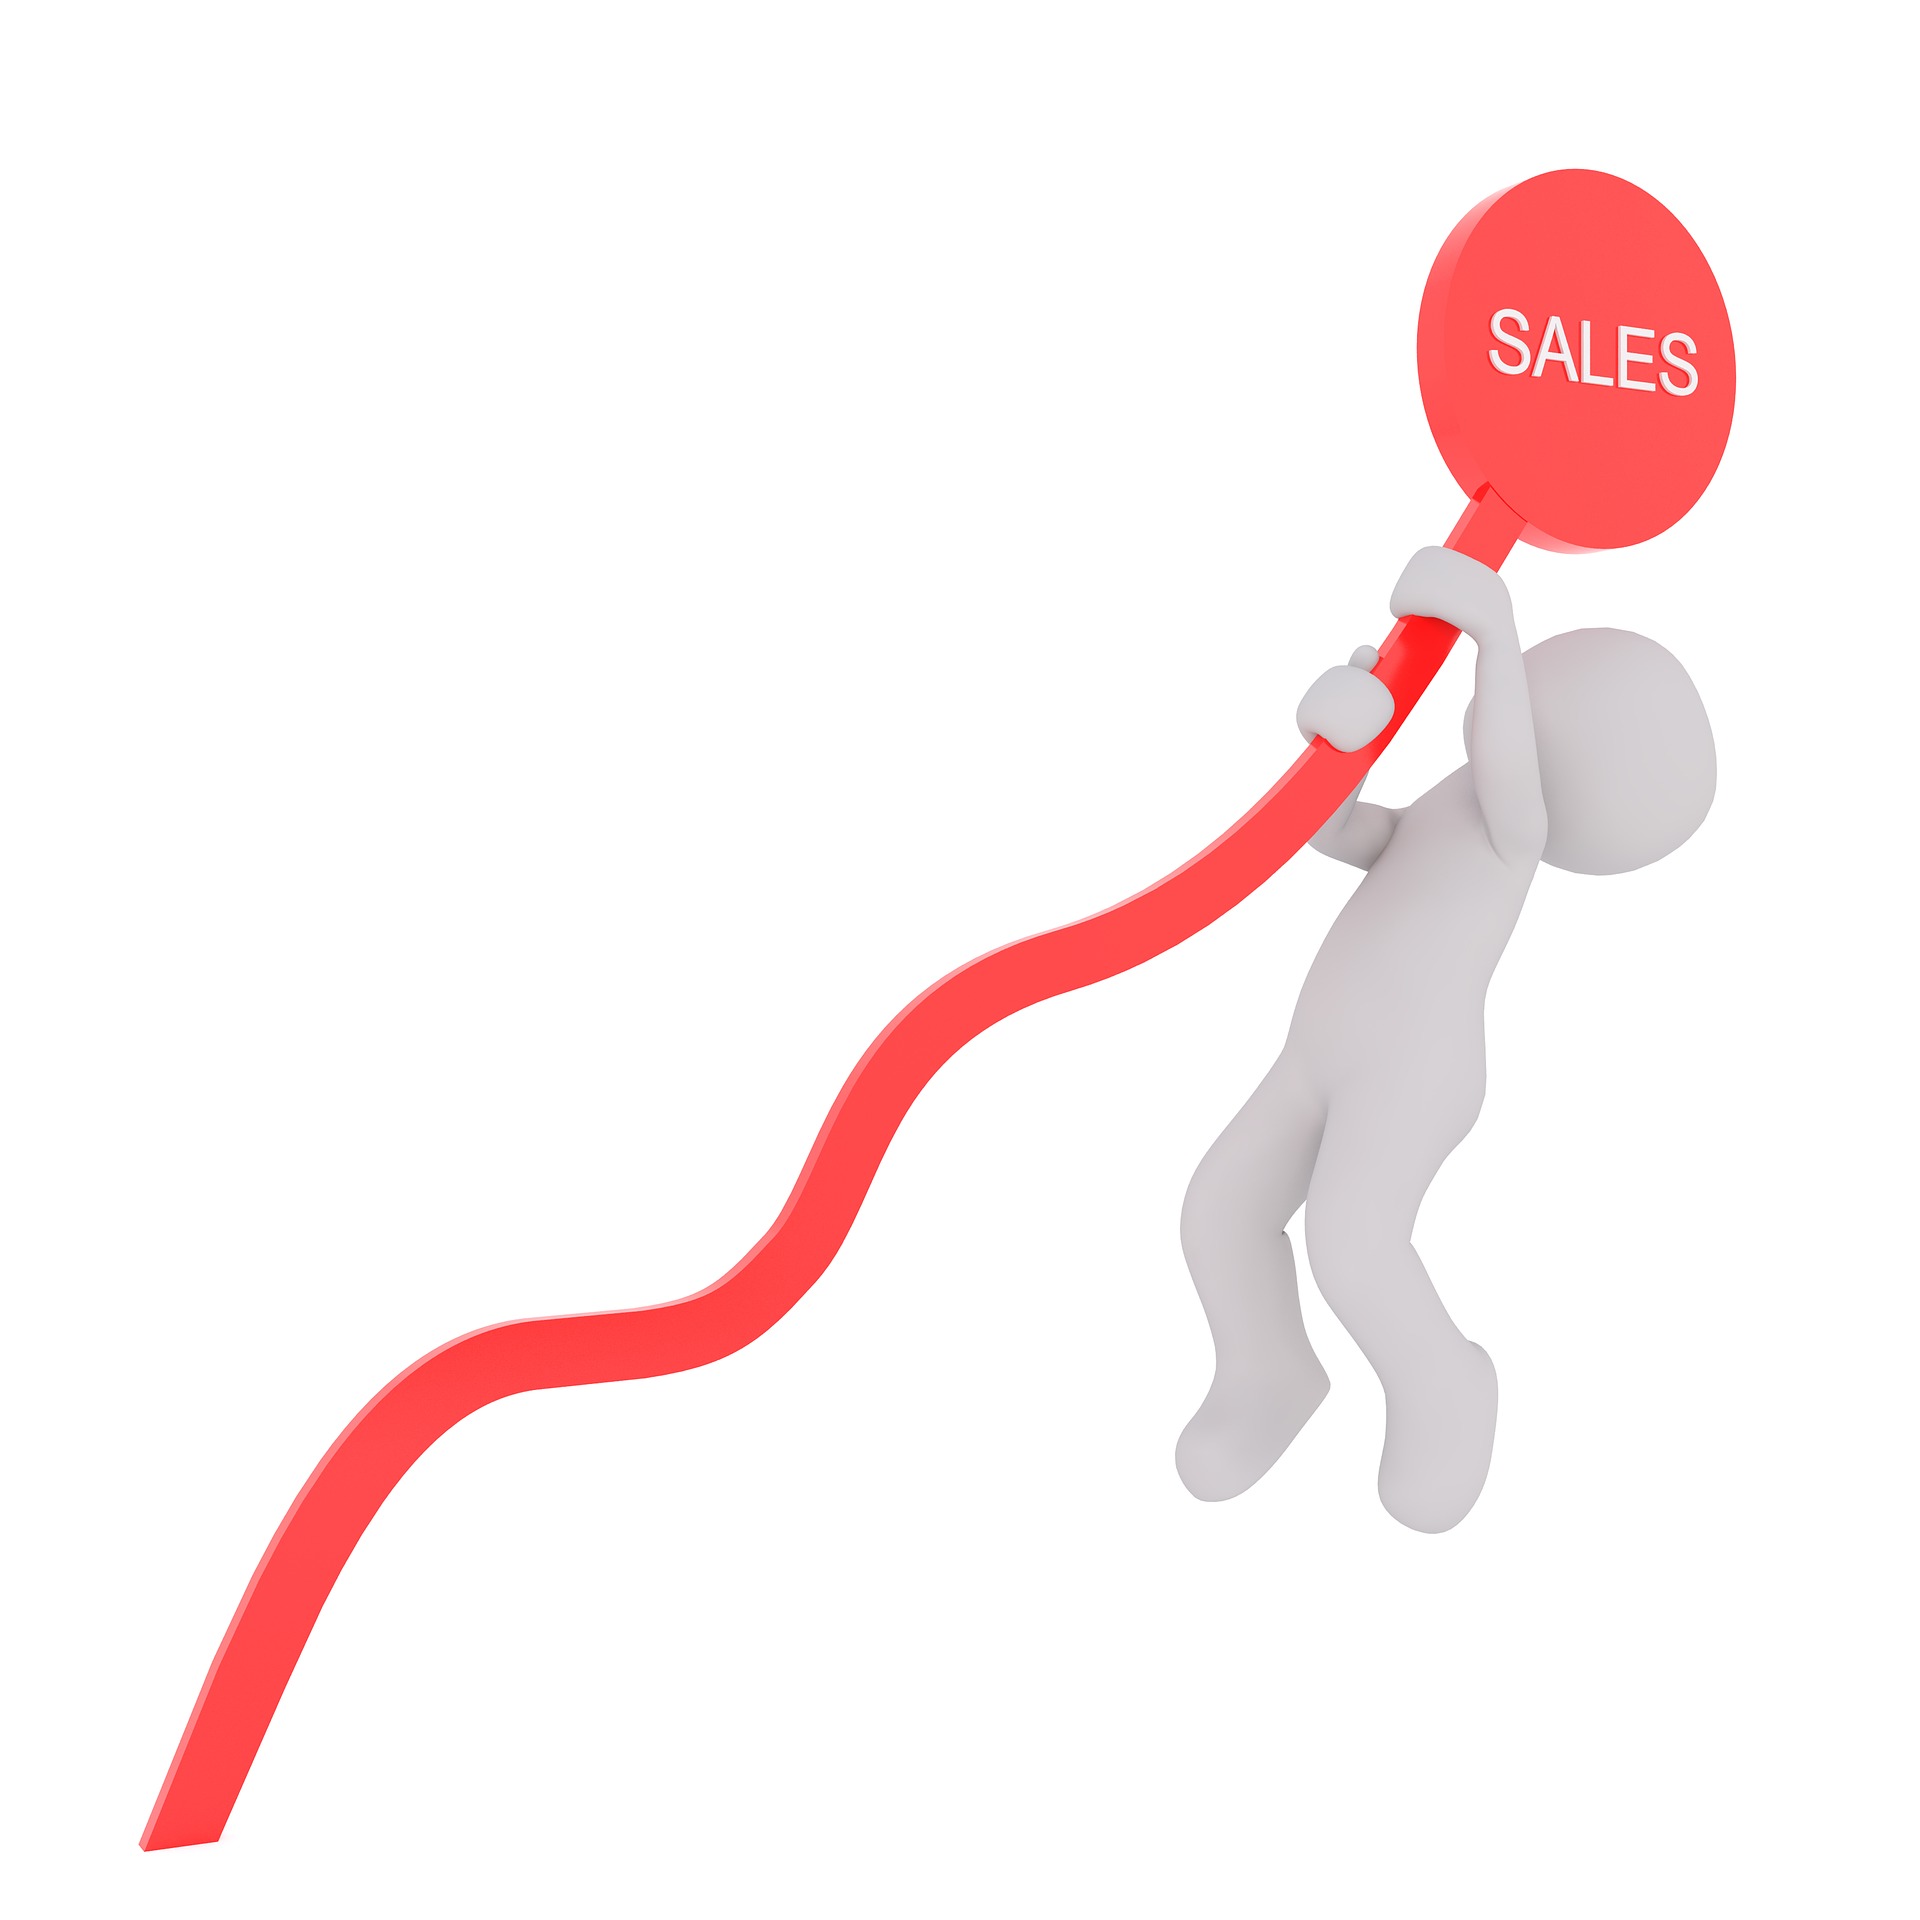 Virtual Training for the Direct Sales Model